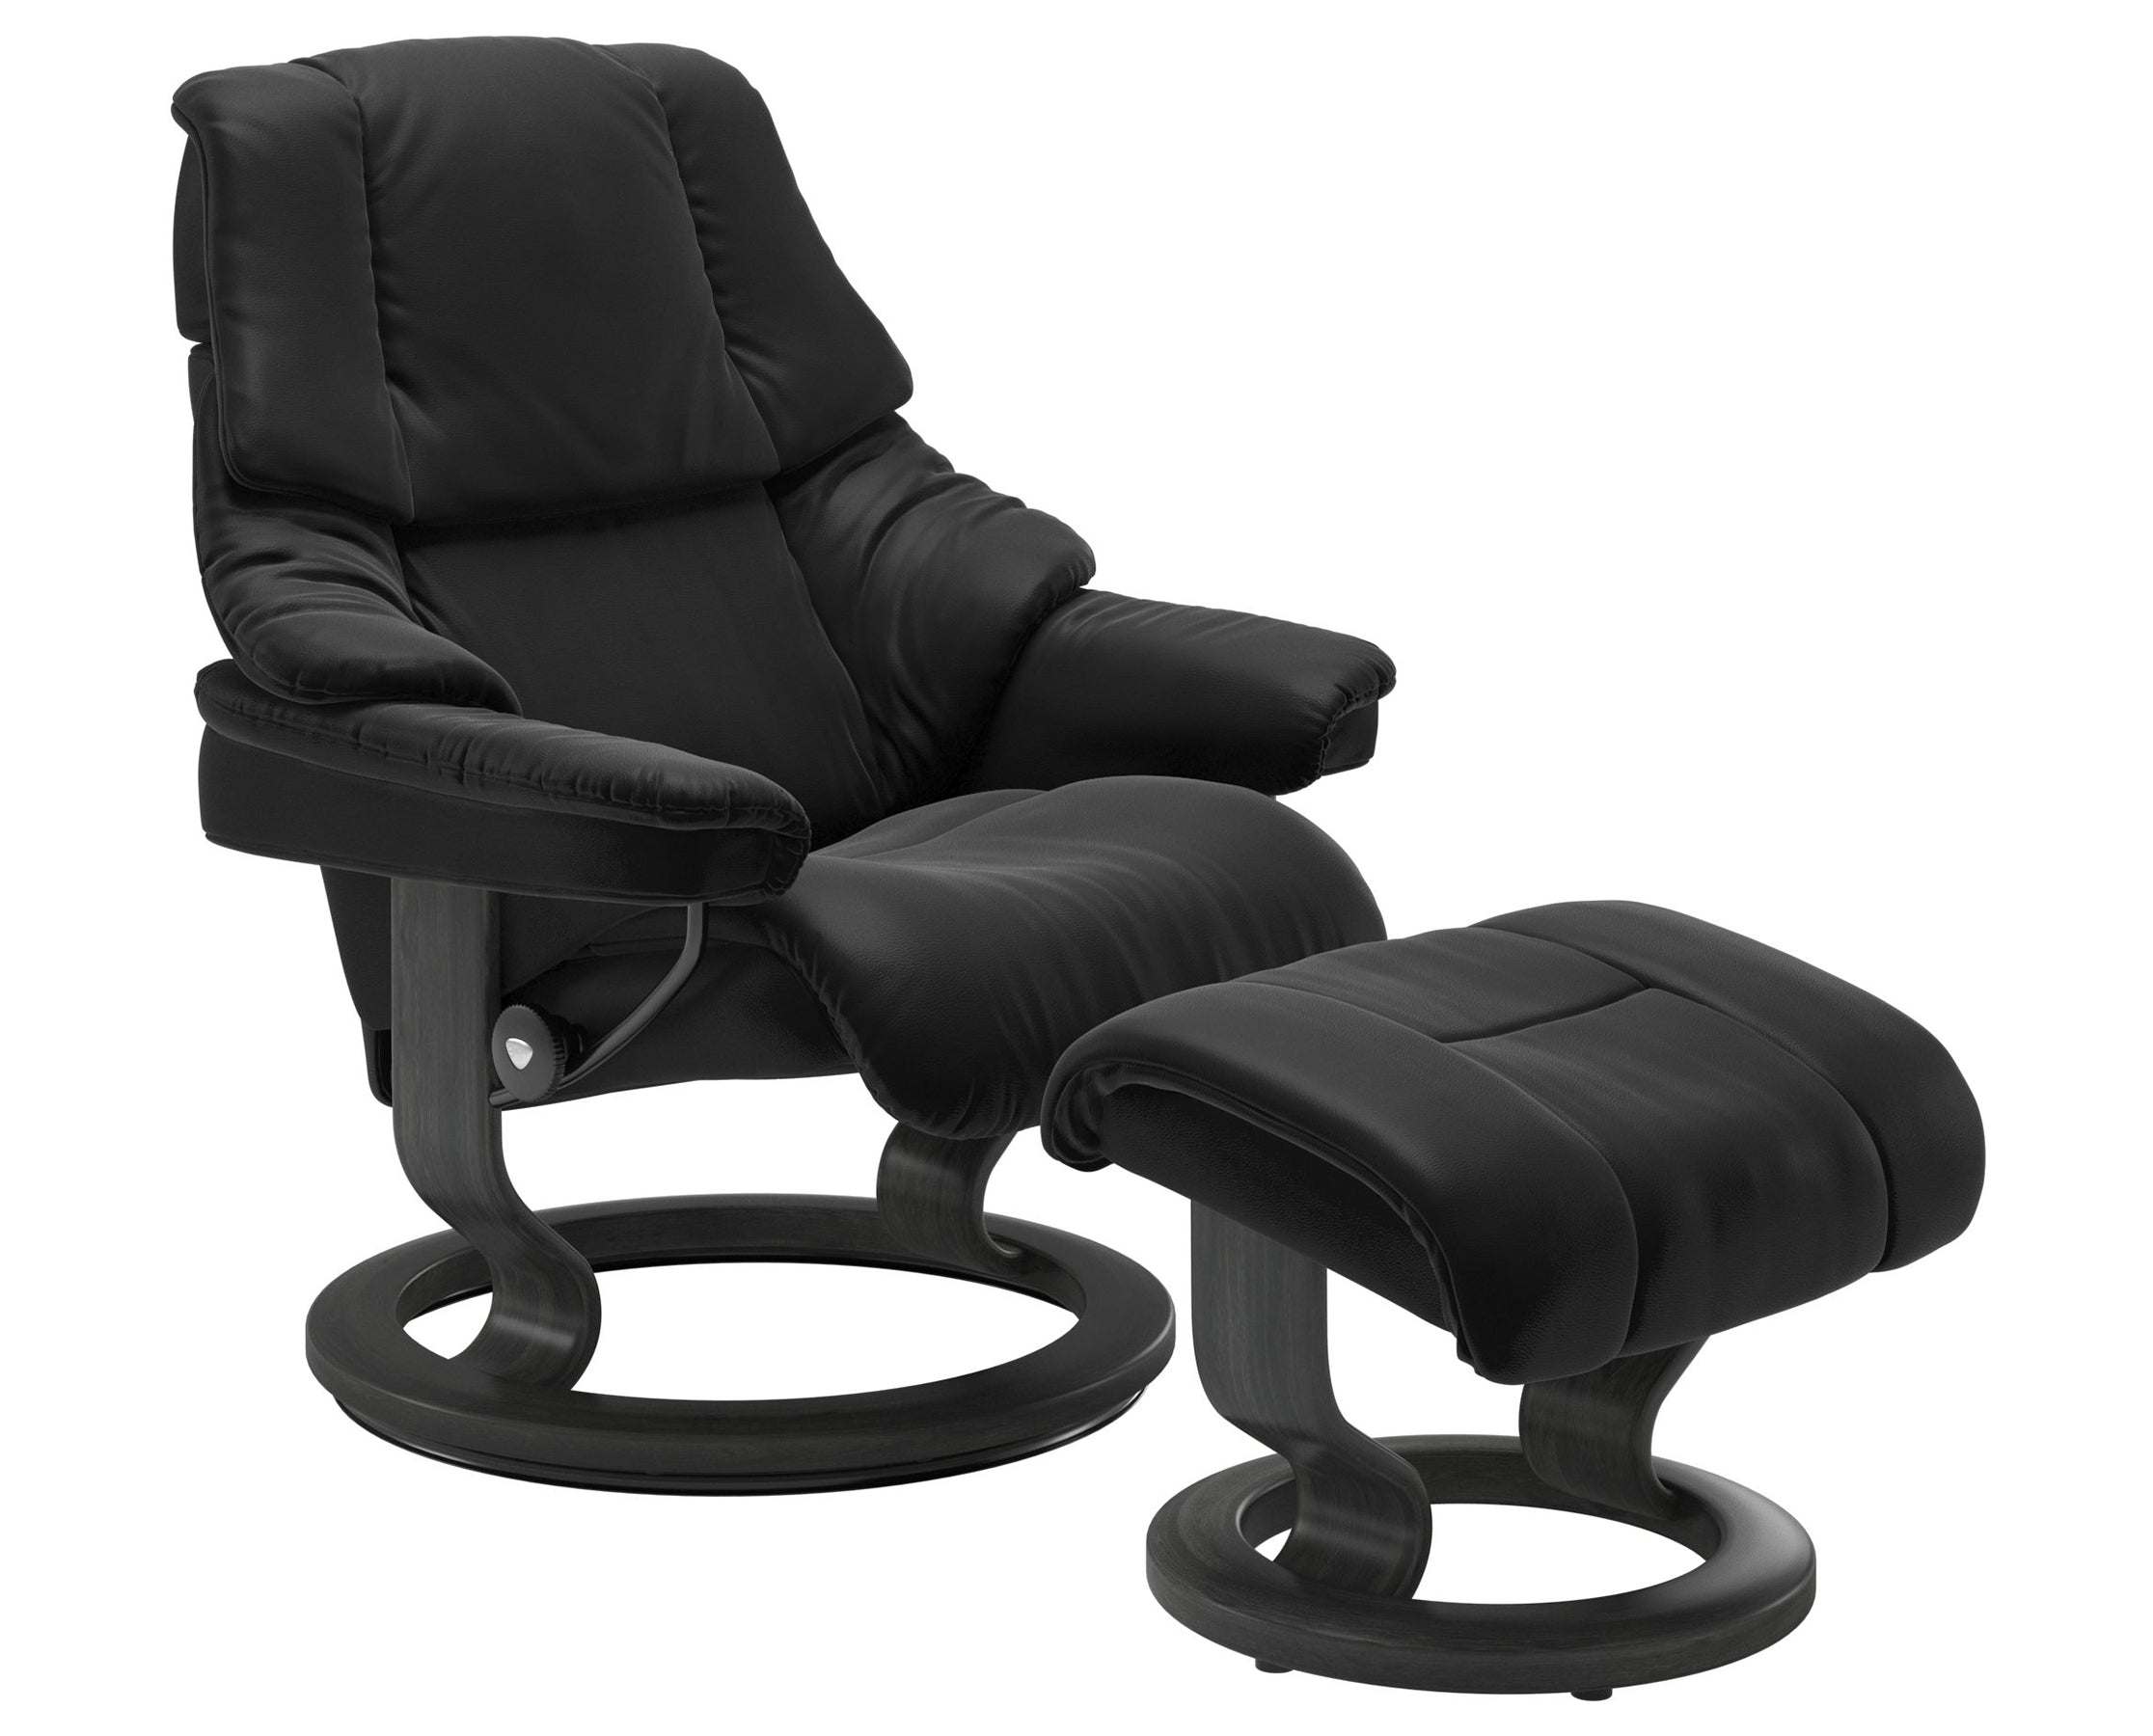 Paloma Leather Black S/M/L and Grey Base | Stressless Reno Classic Recliner | Valley Ridge Furniture